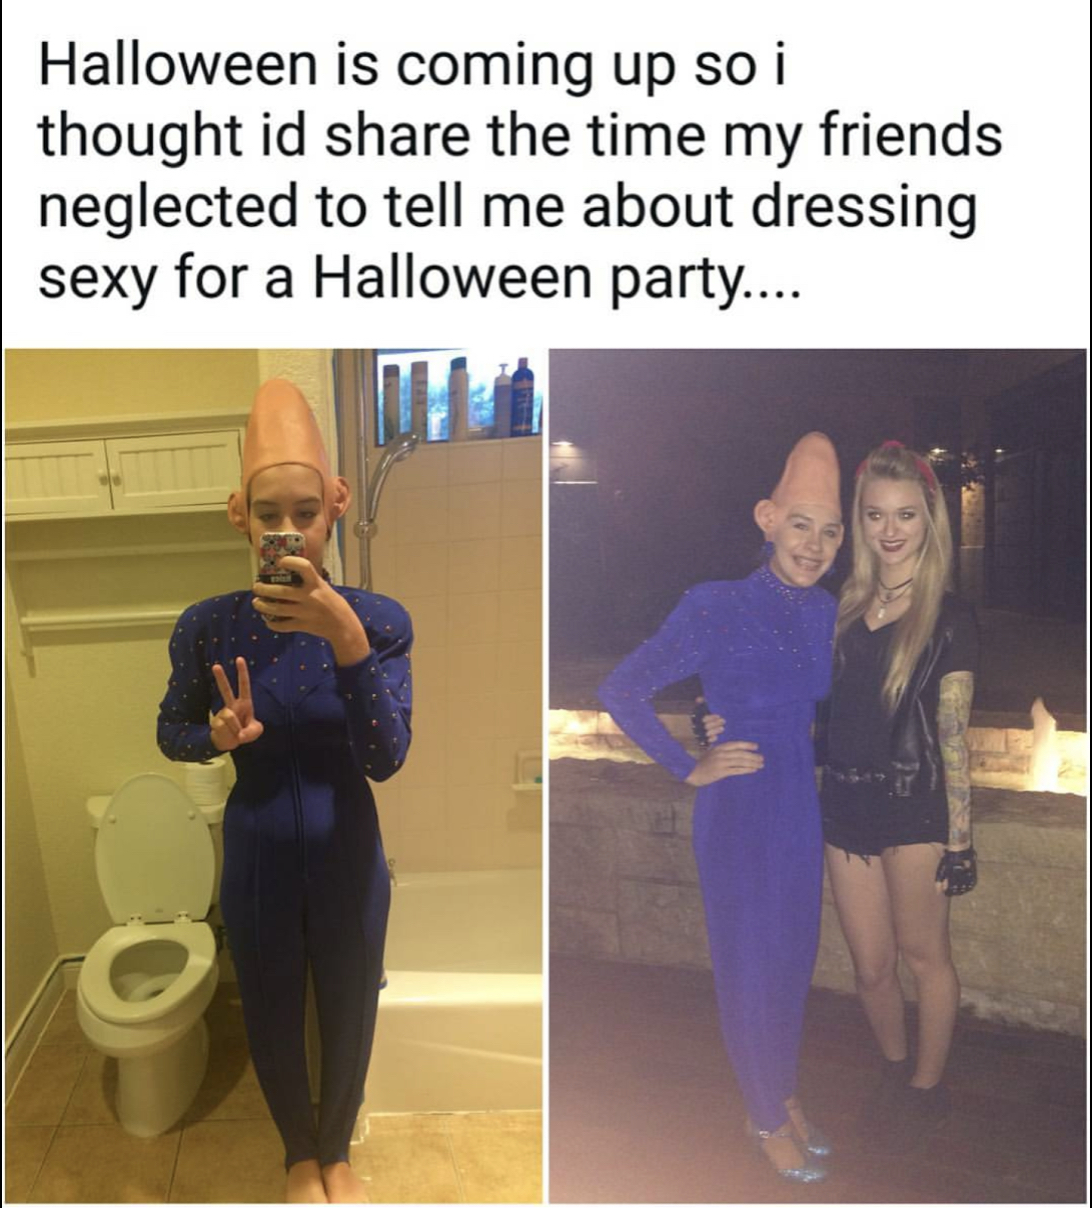 me vs my friends halloween meme - Halloween is coming up so i thought id the time my friends neglected to tell me about dressing sexy for a Halloween party....